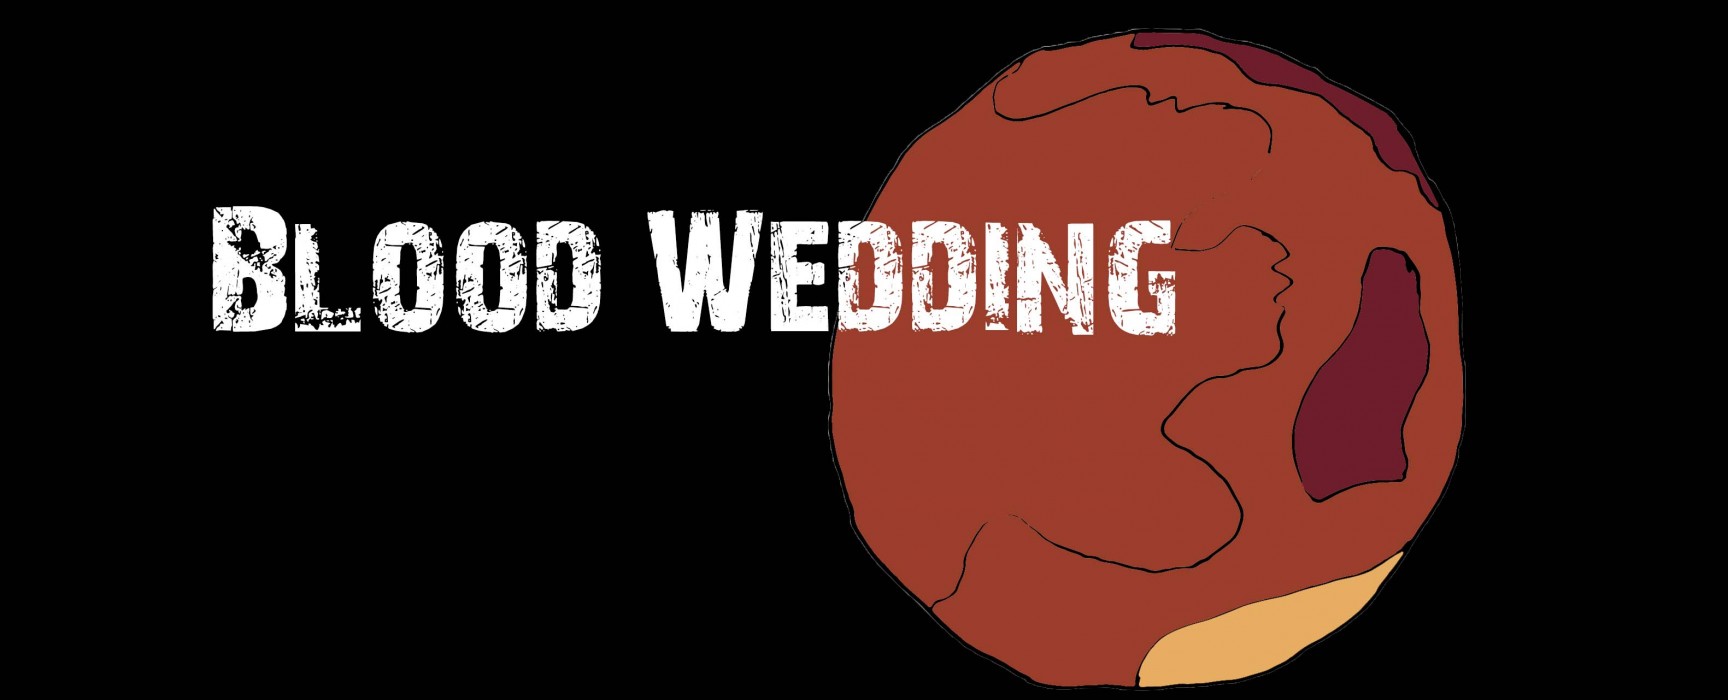 Audience witnesses the unexpected at Blood Wedding